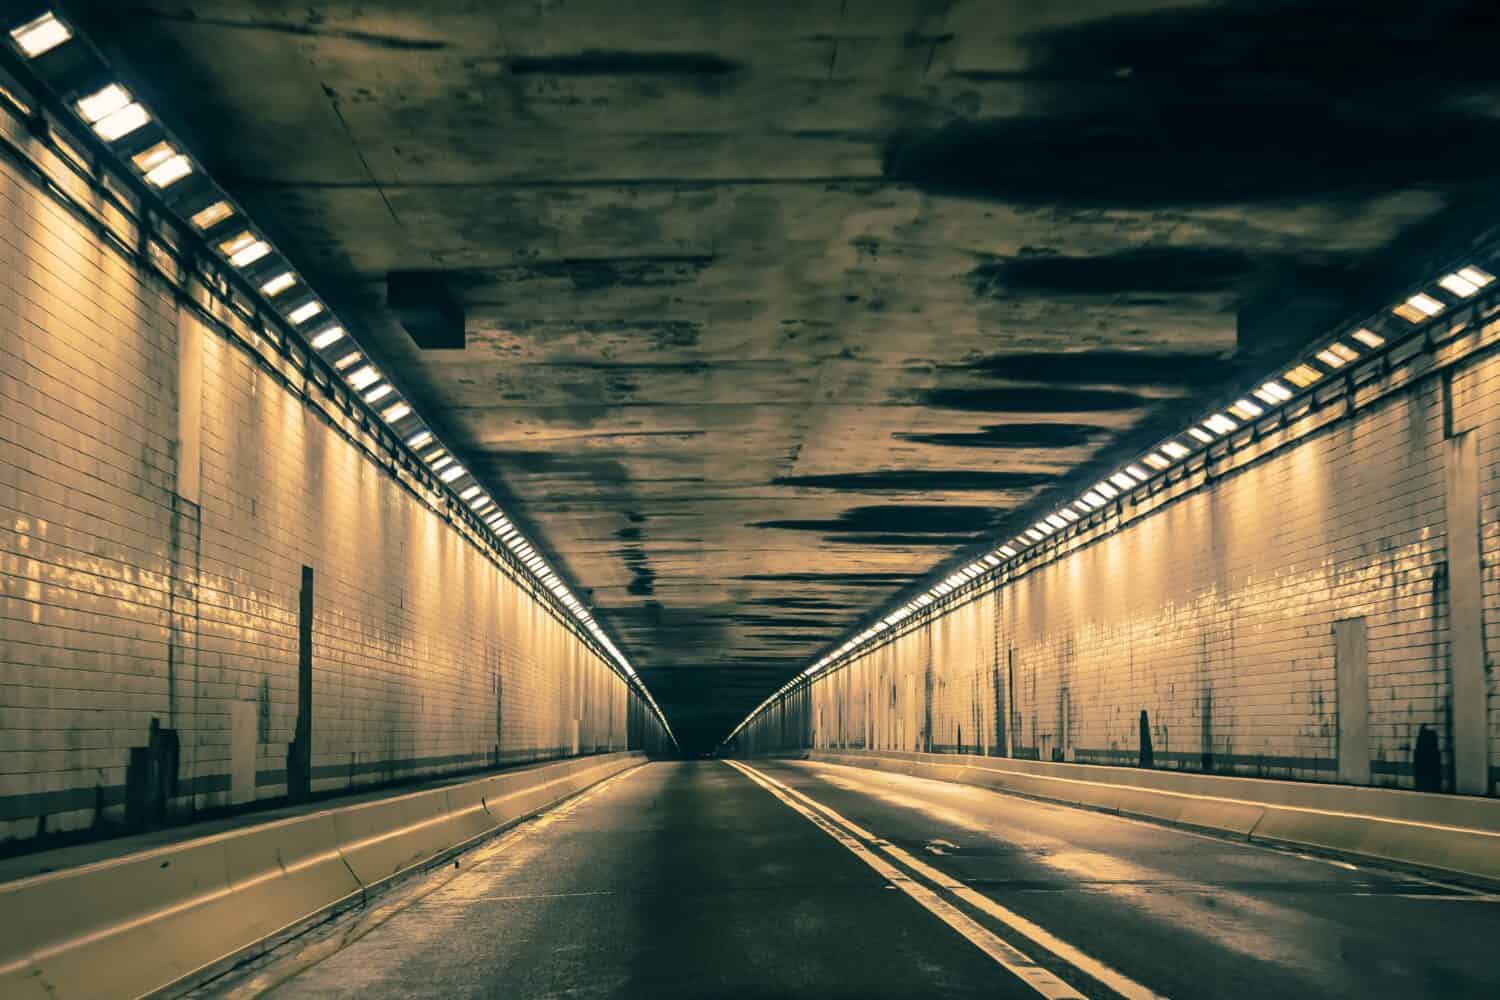 Driving through the Allegheny Mountain Tunnel 